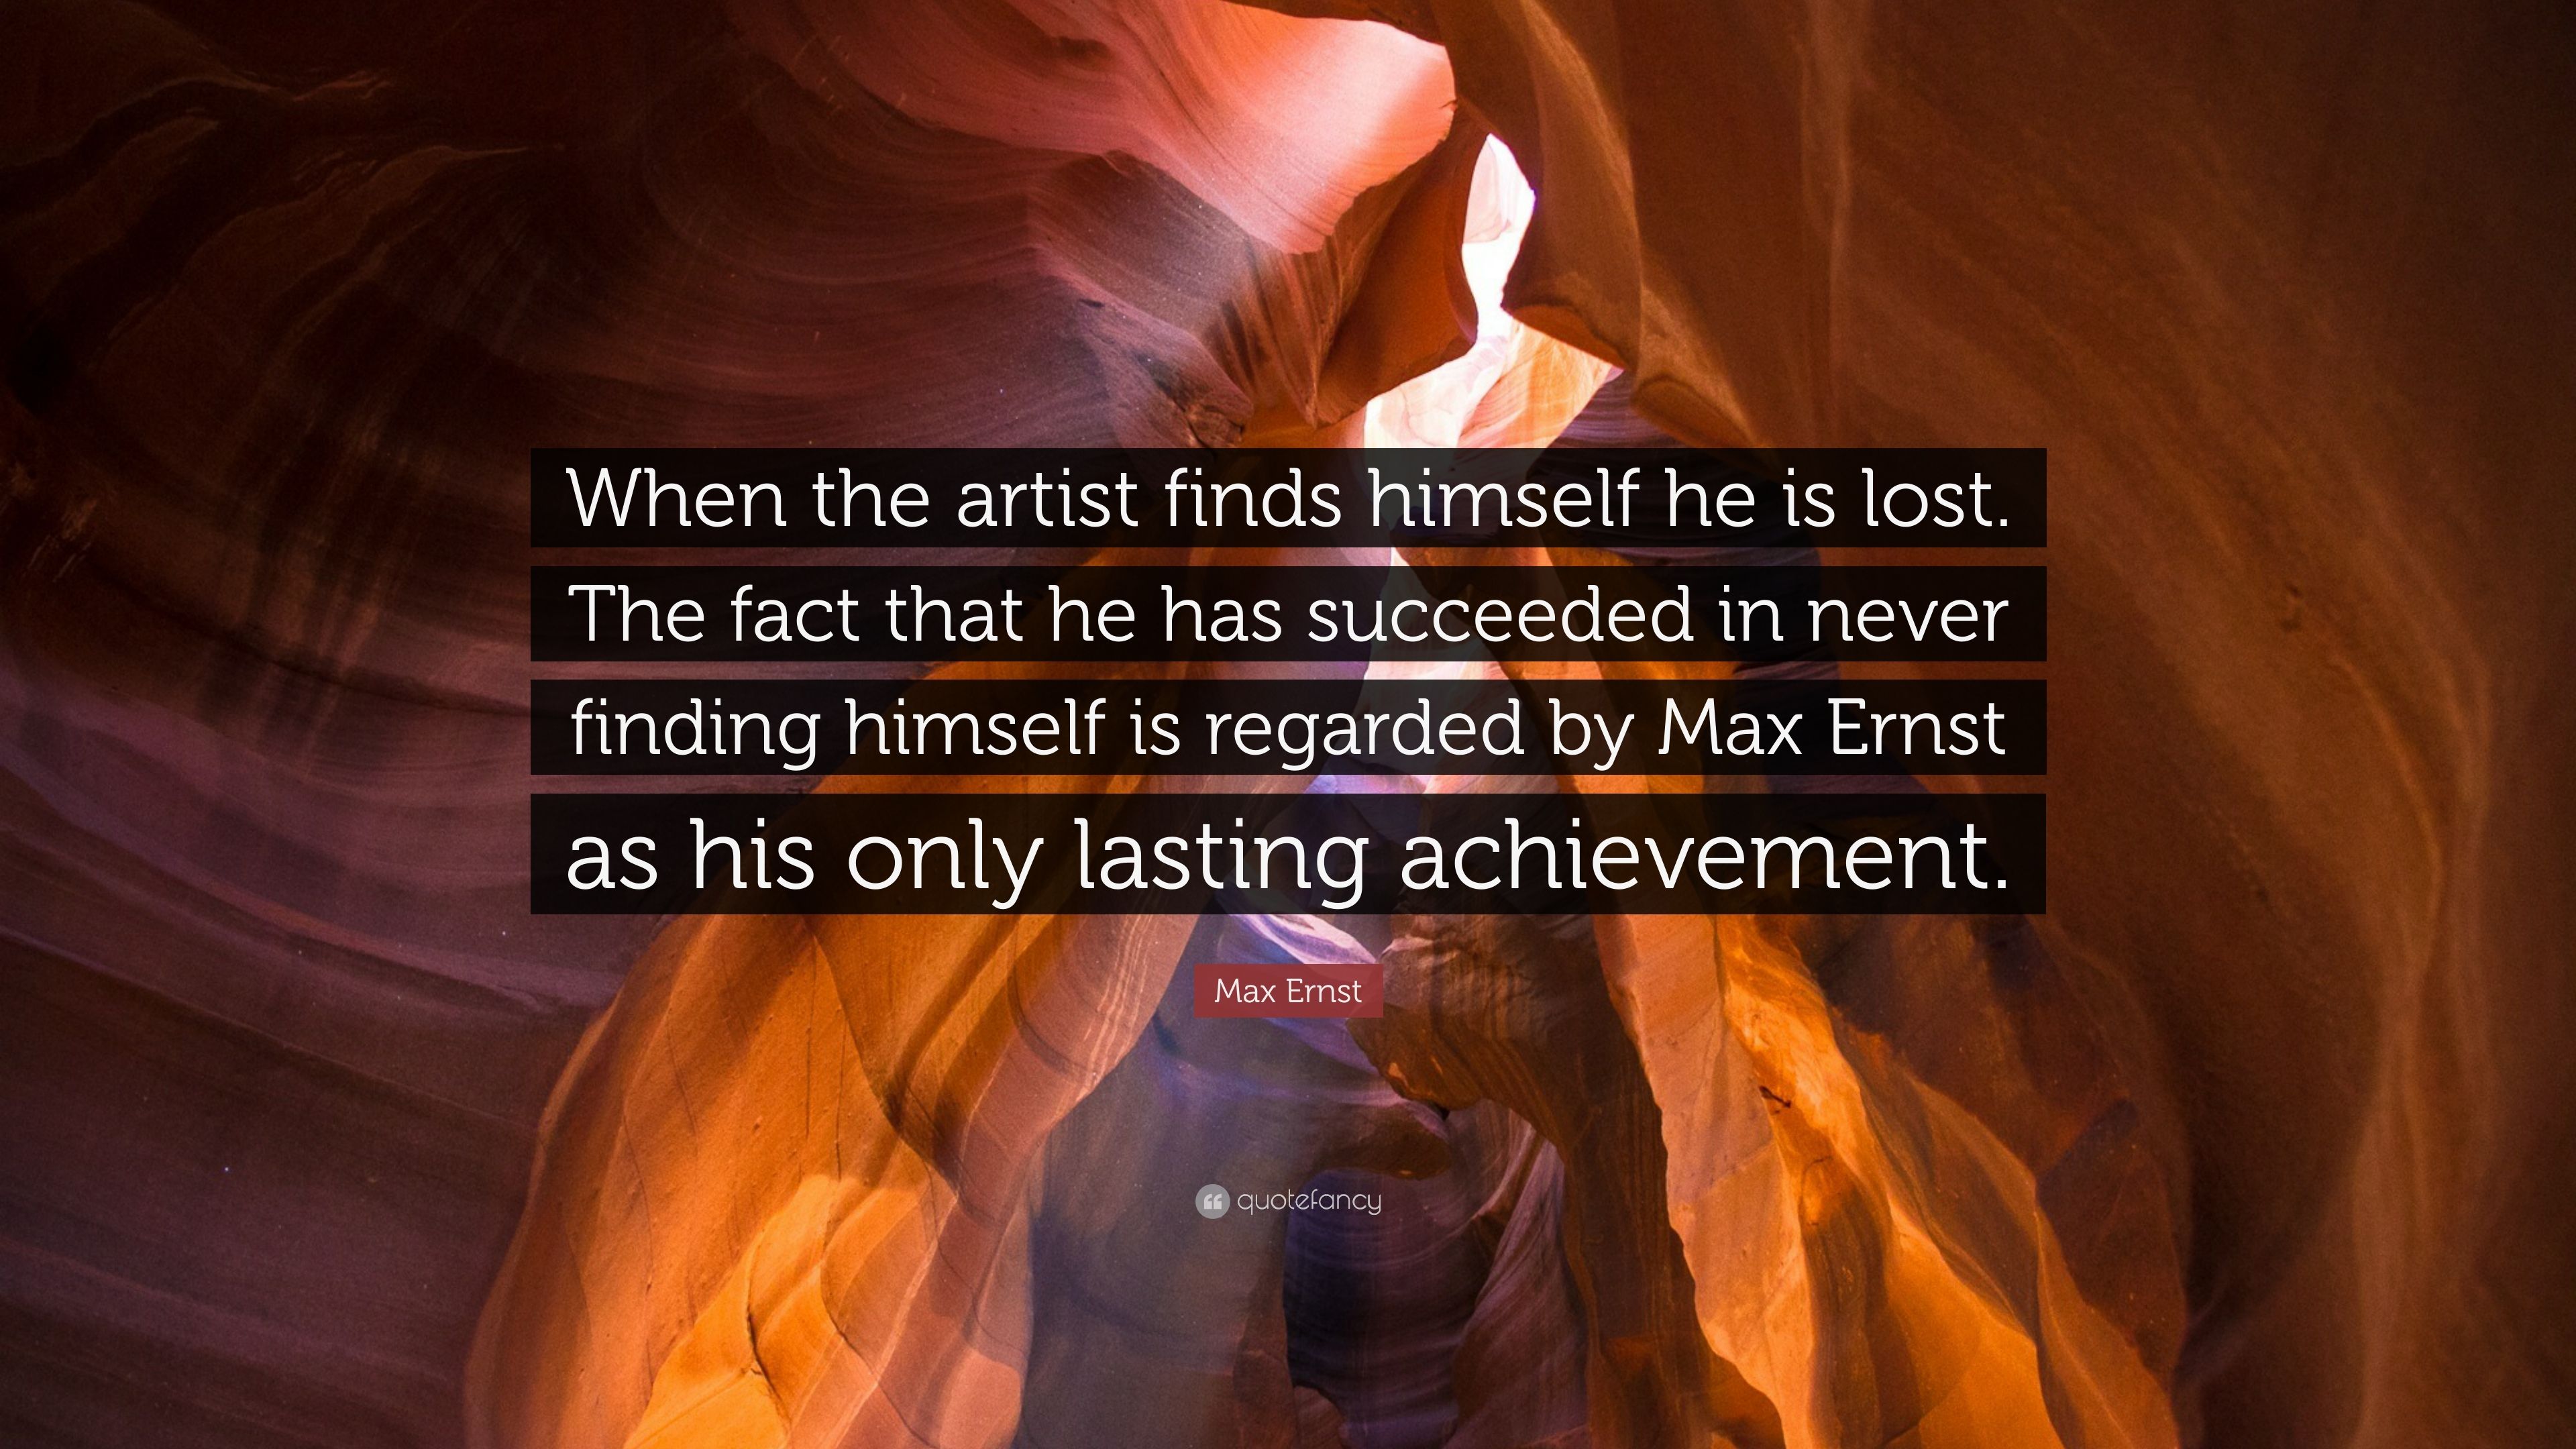 Max Ernst Quote: “When the artist finds himself he is lost